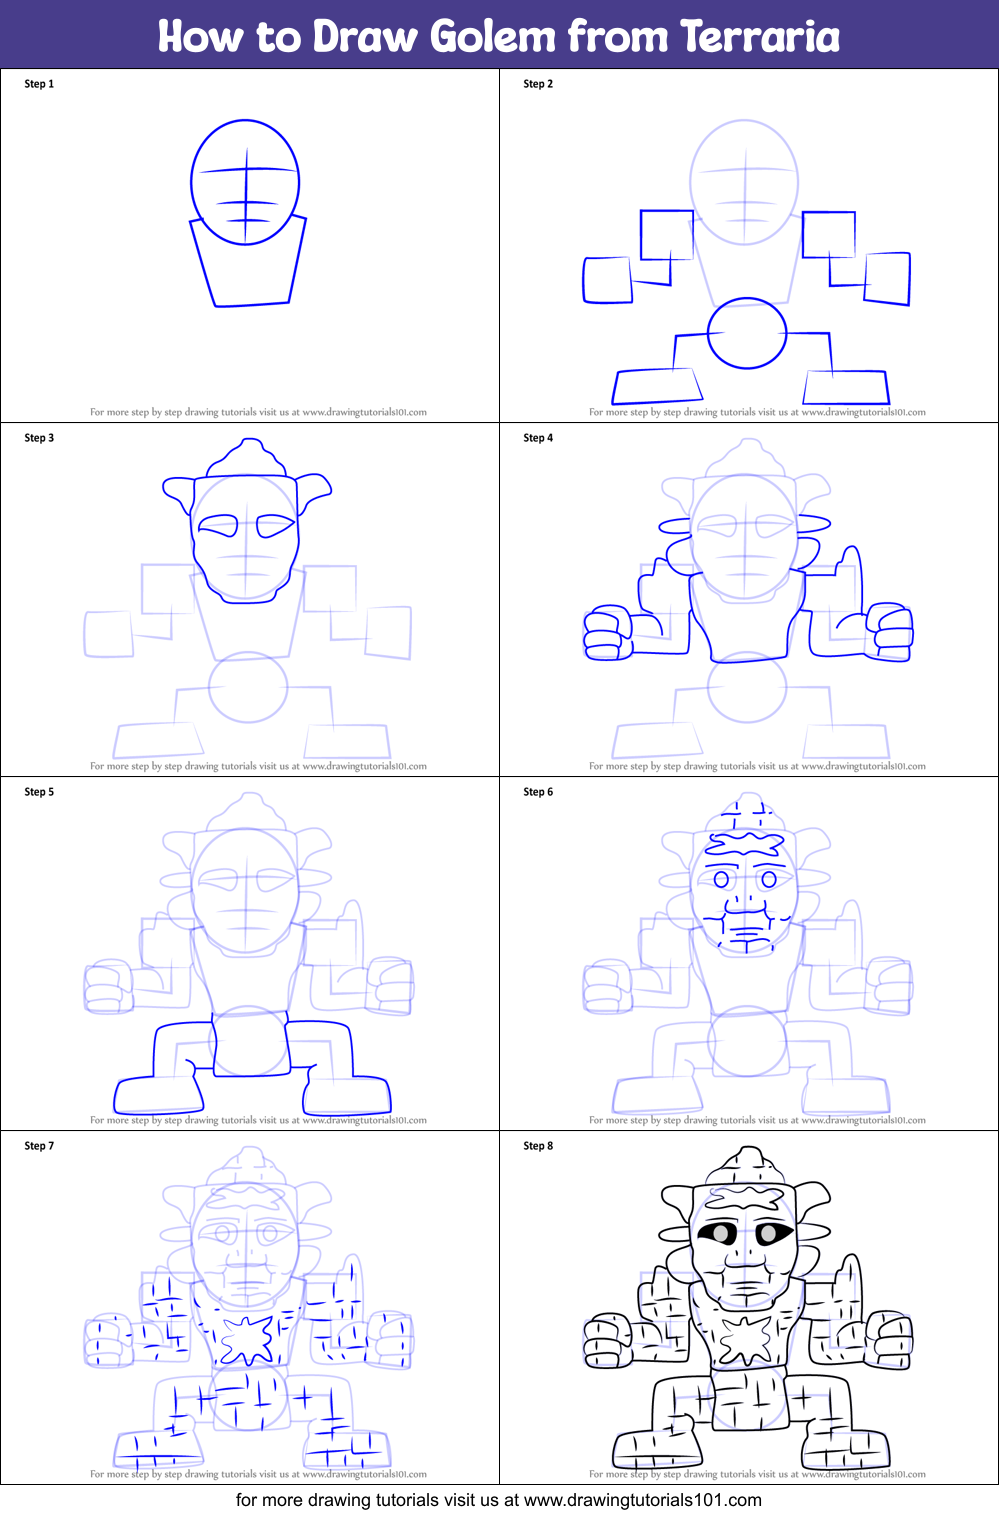 How to Draw Golem from Terraria printable step by step drawing sheet